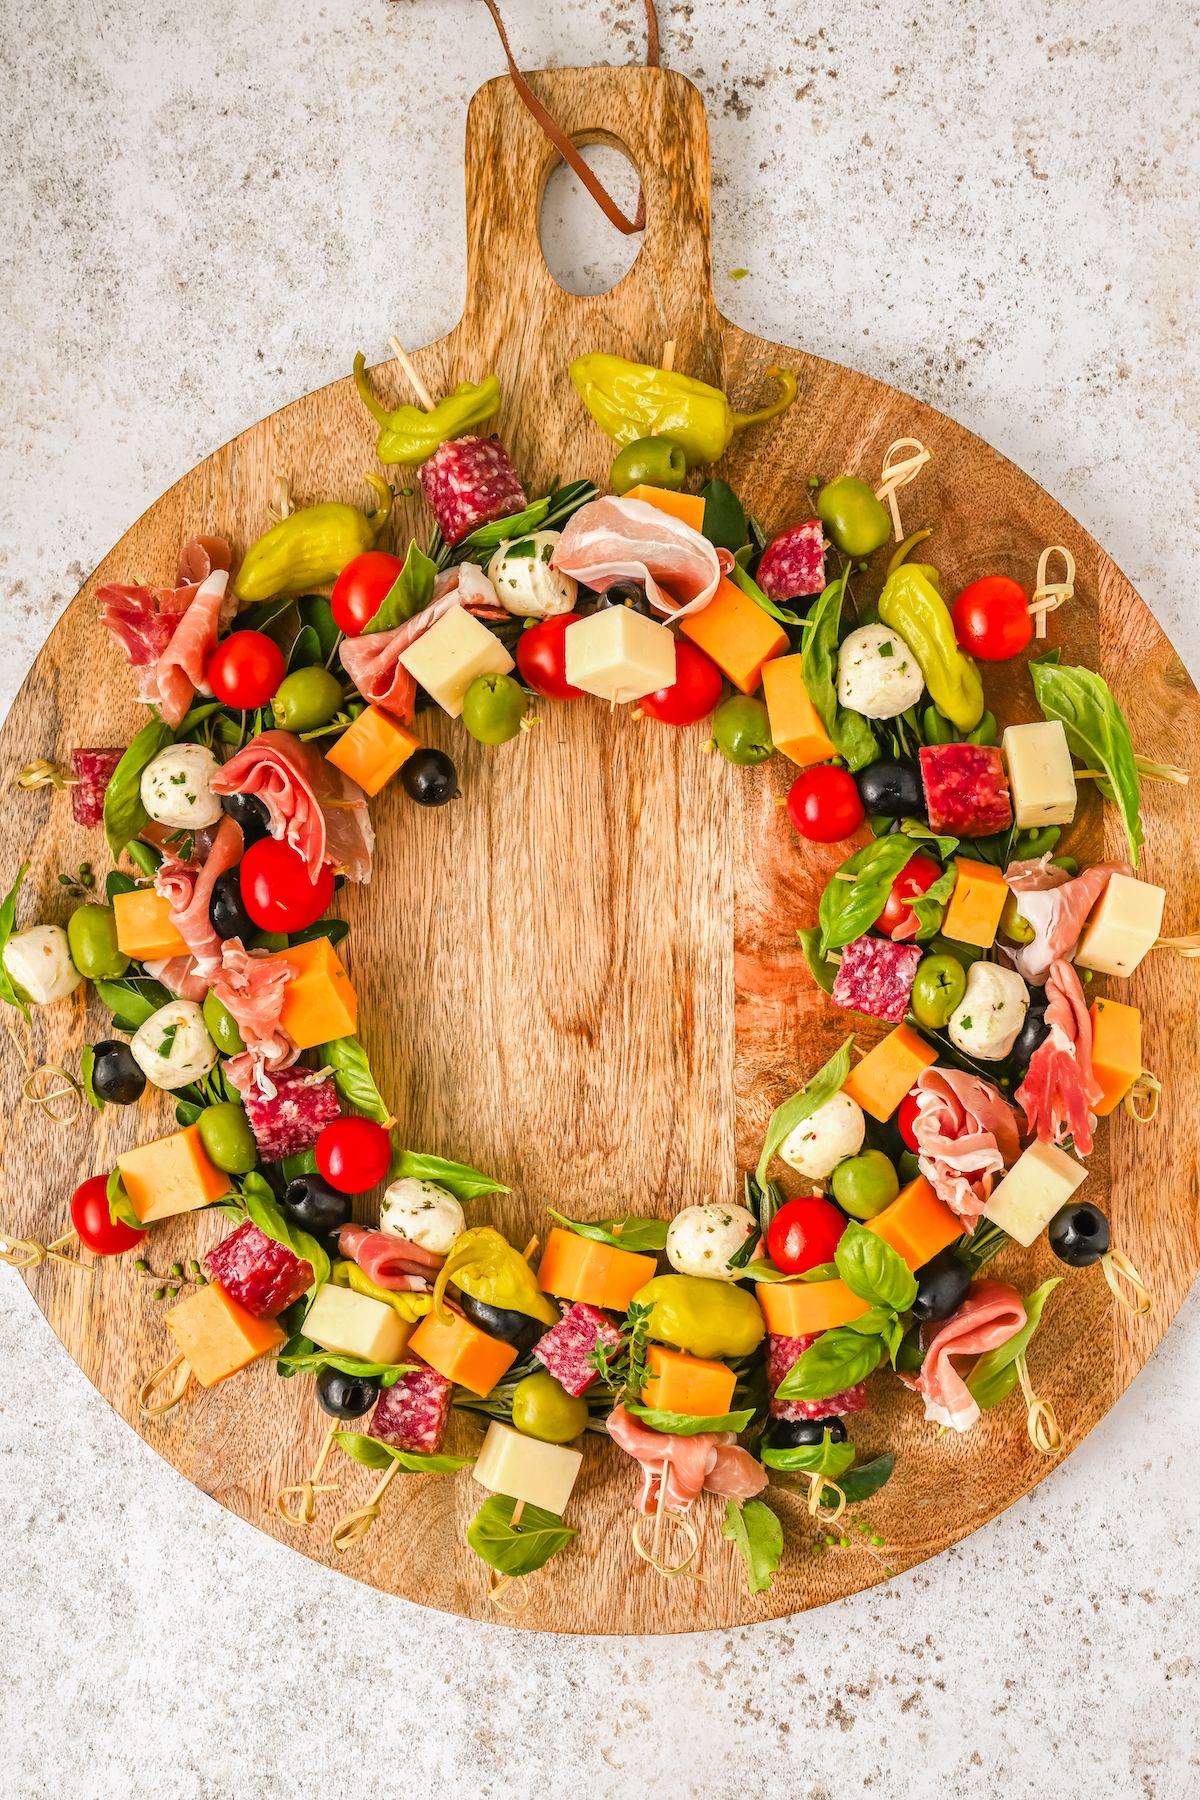 Skewers of appetizers arranged into a circle on a cutting board.